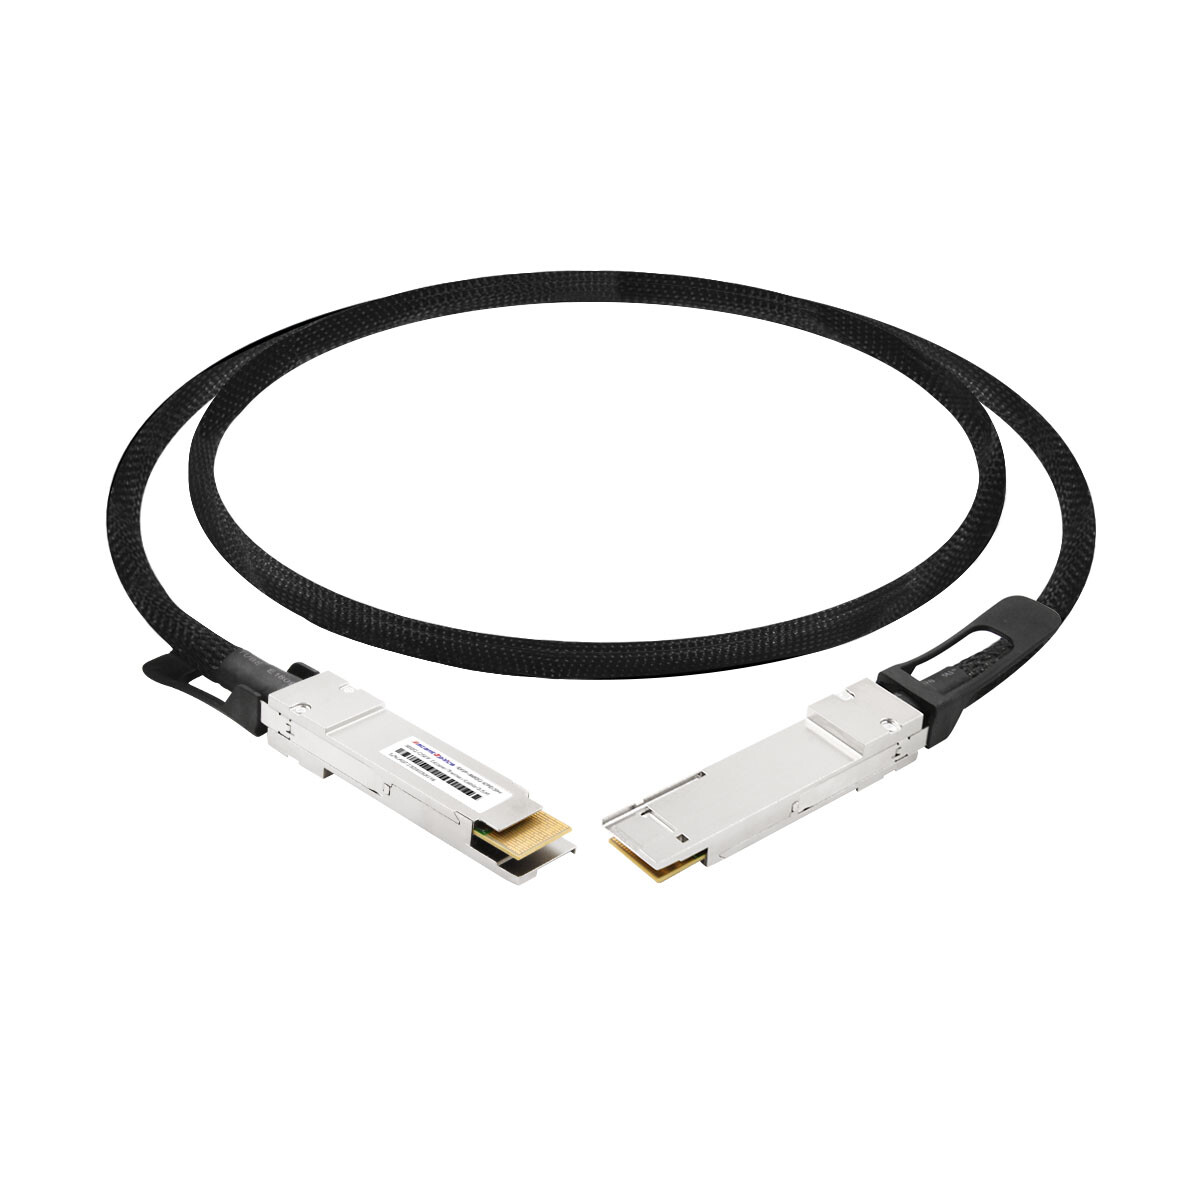 800G OSFP Copper DAC Cable,0.5 Meter,Passive